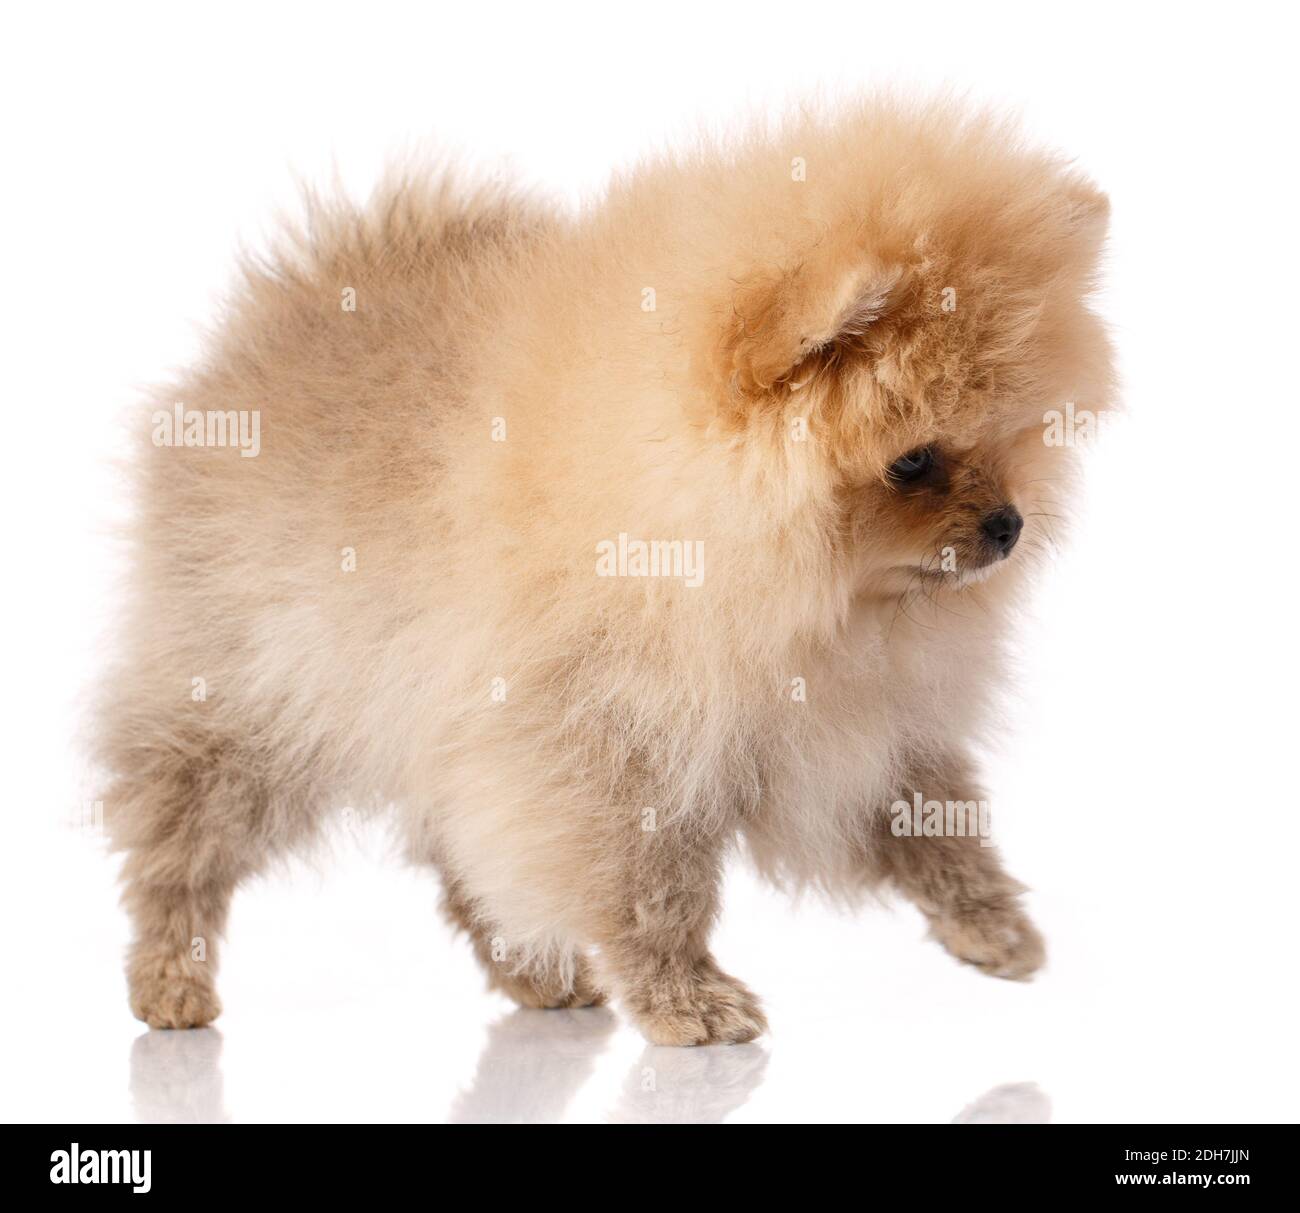 Fluffy light brown Pomeranian Spitz stands on a white background. Studio shooting. Stock Photo